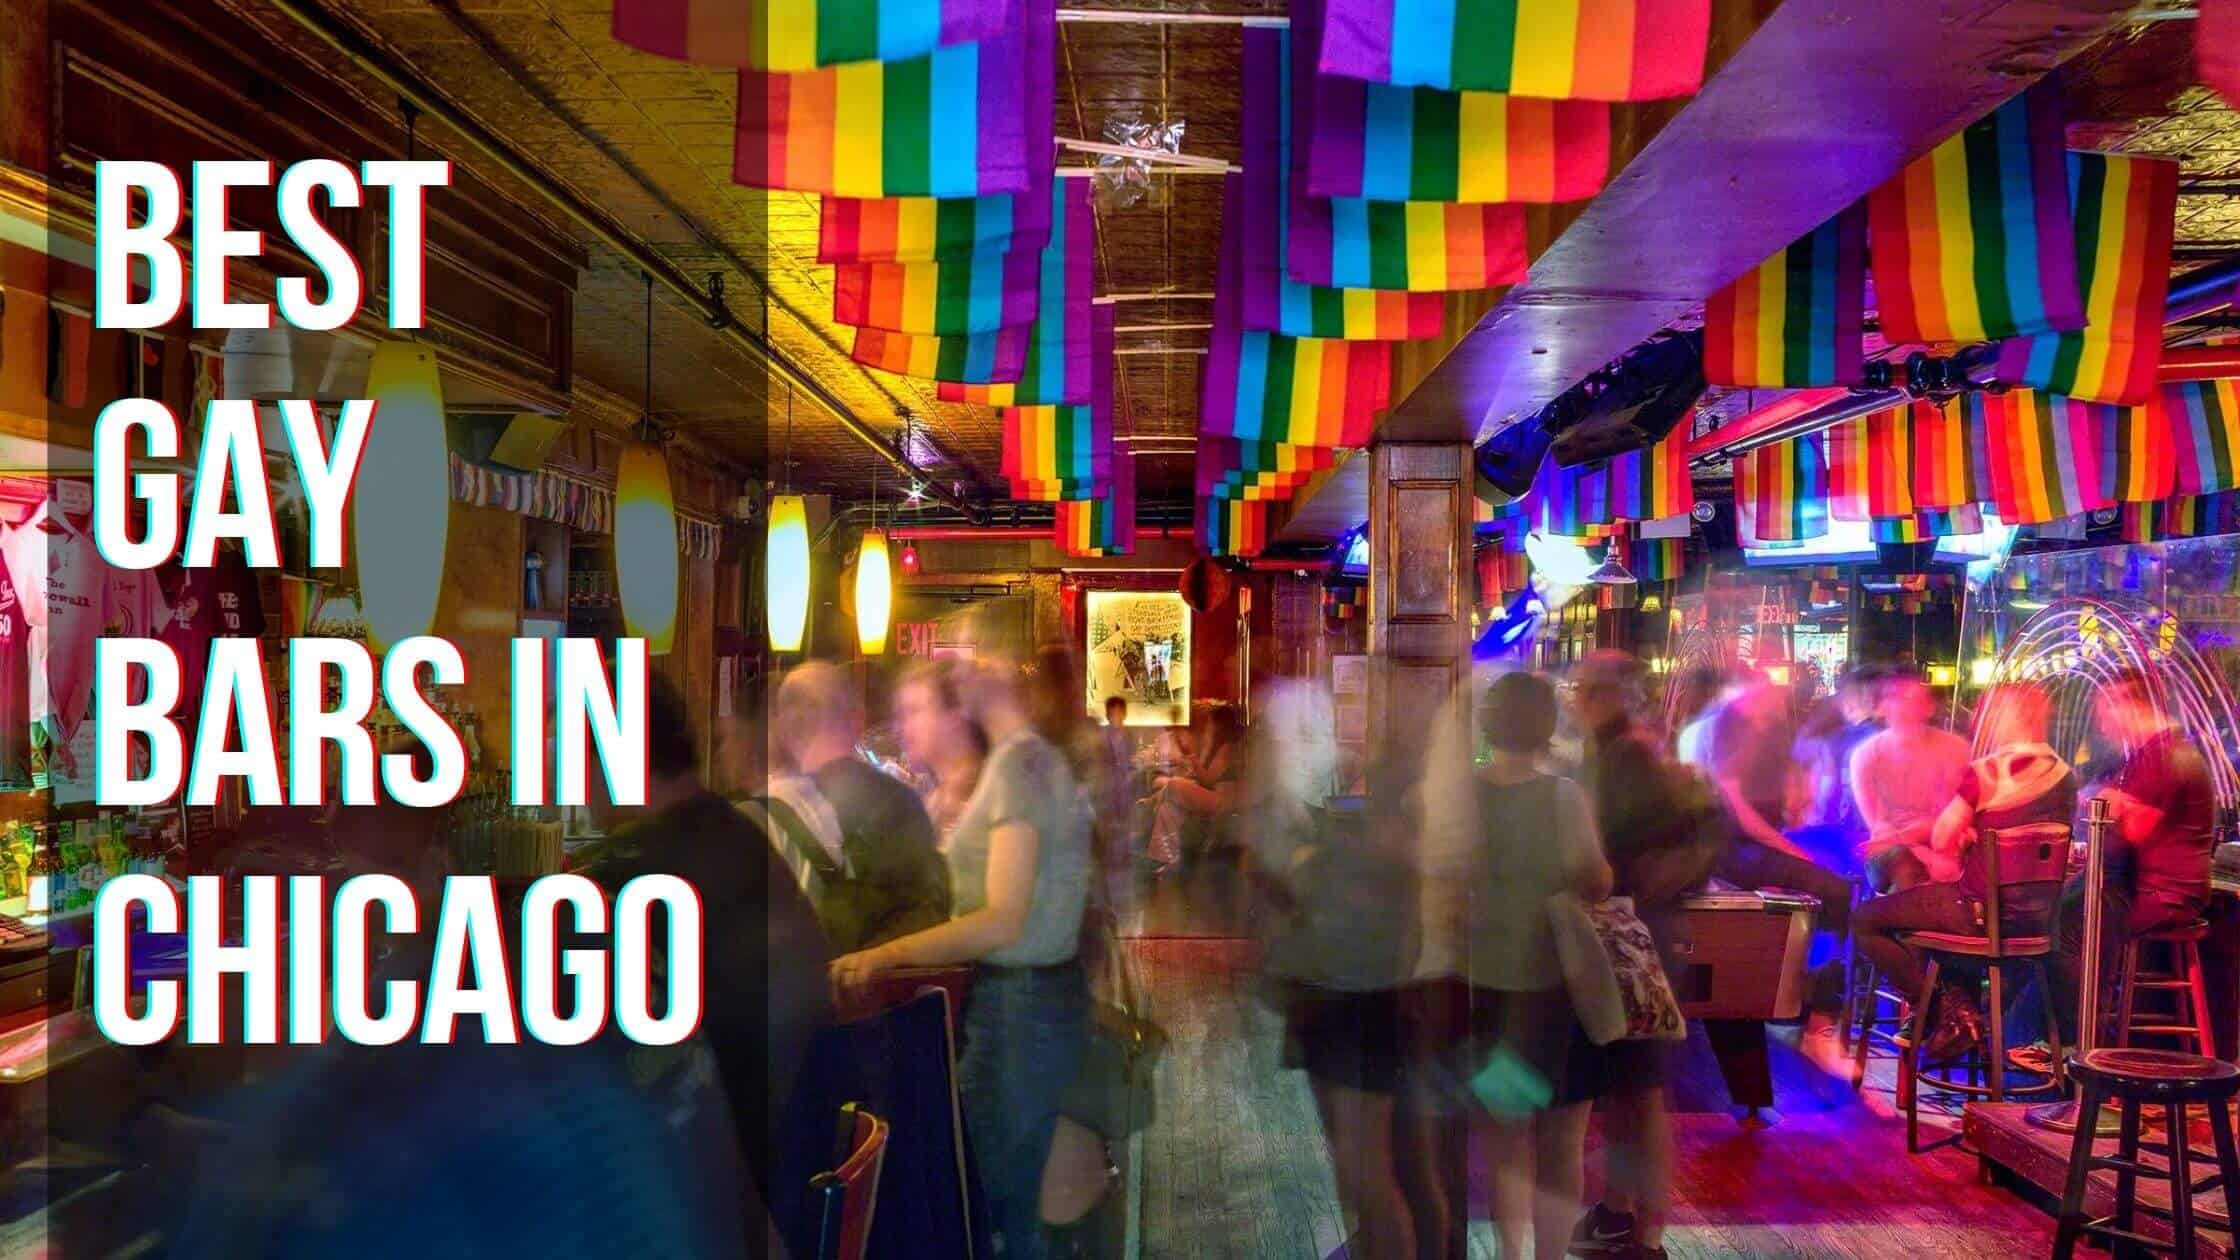 Best Gay Bars In Chicago